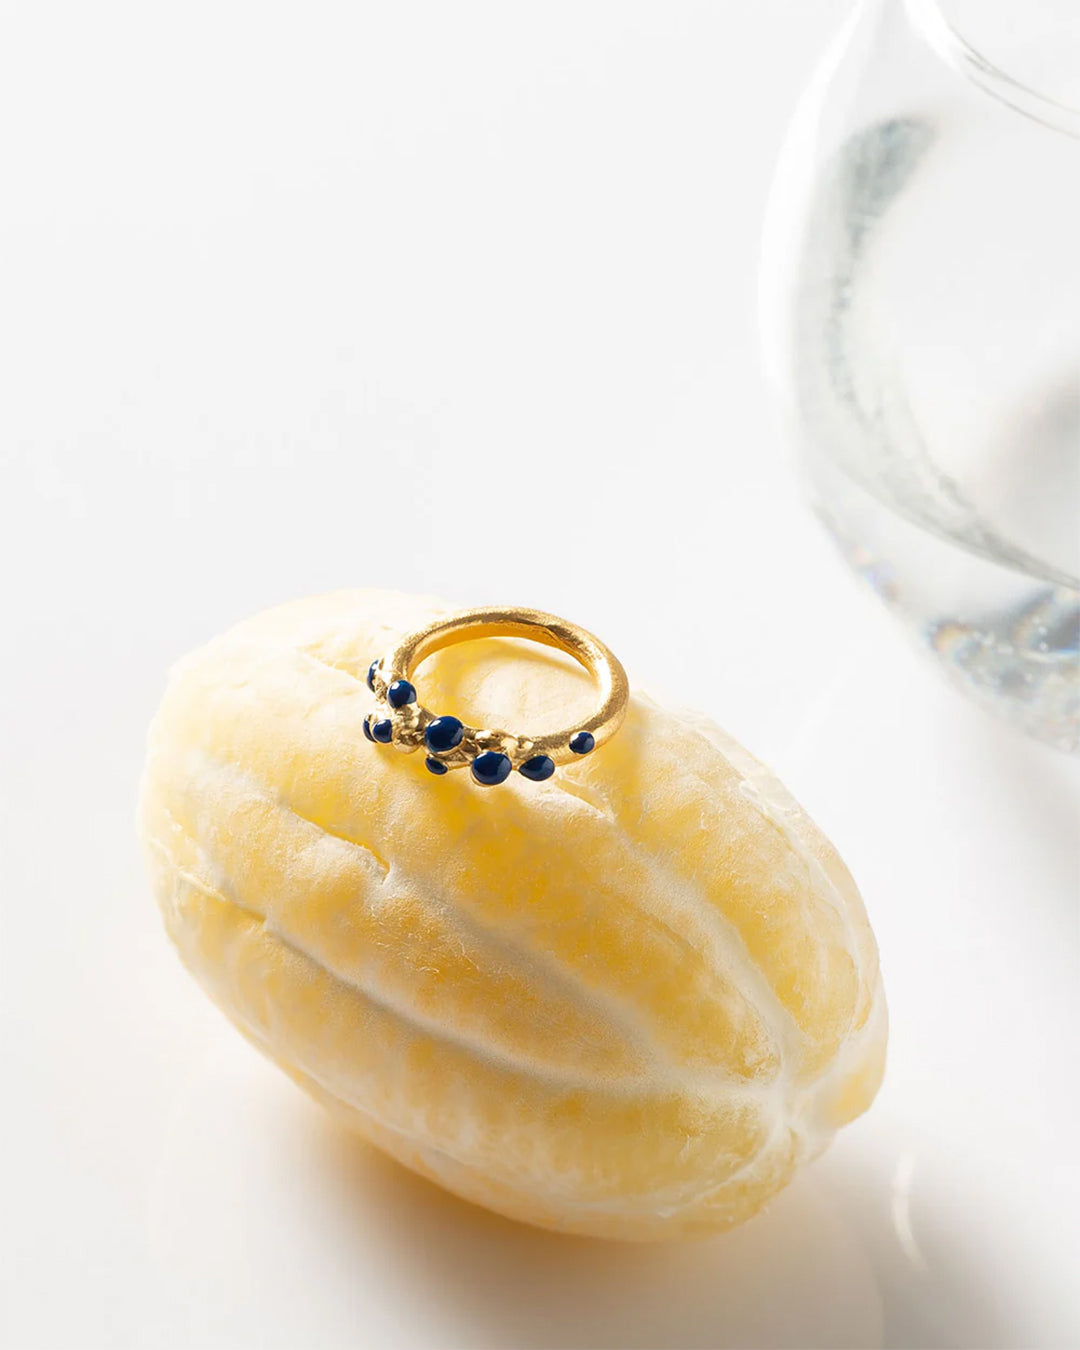 Elegant gold ring with blue stones presented on a lemon, crafted by artisan, symbolizing fresh, innovative design.